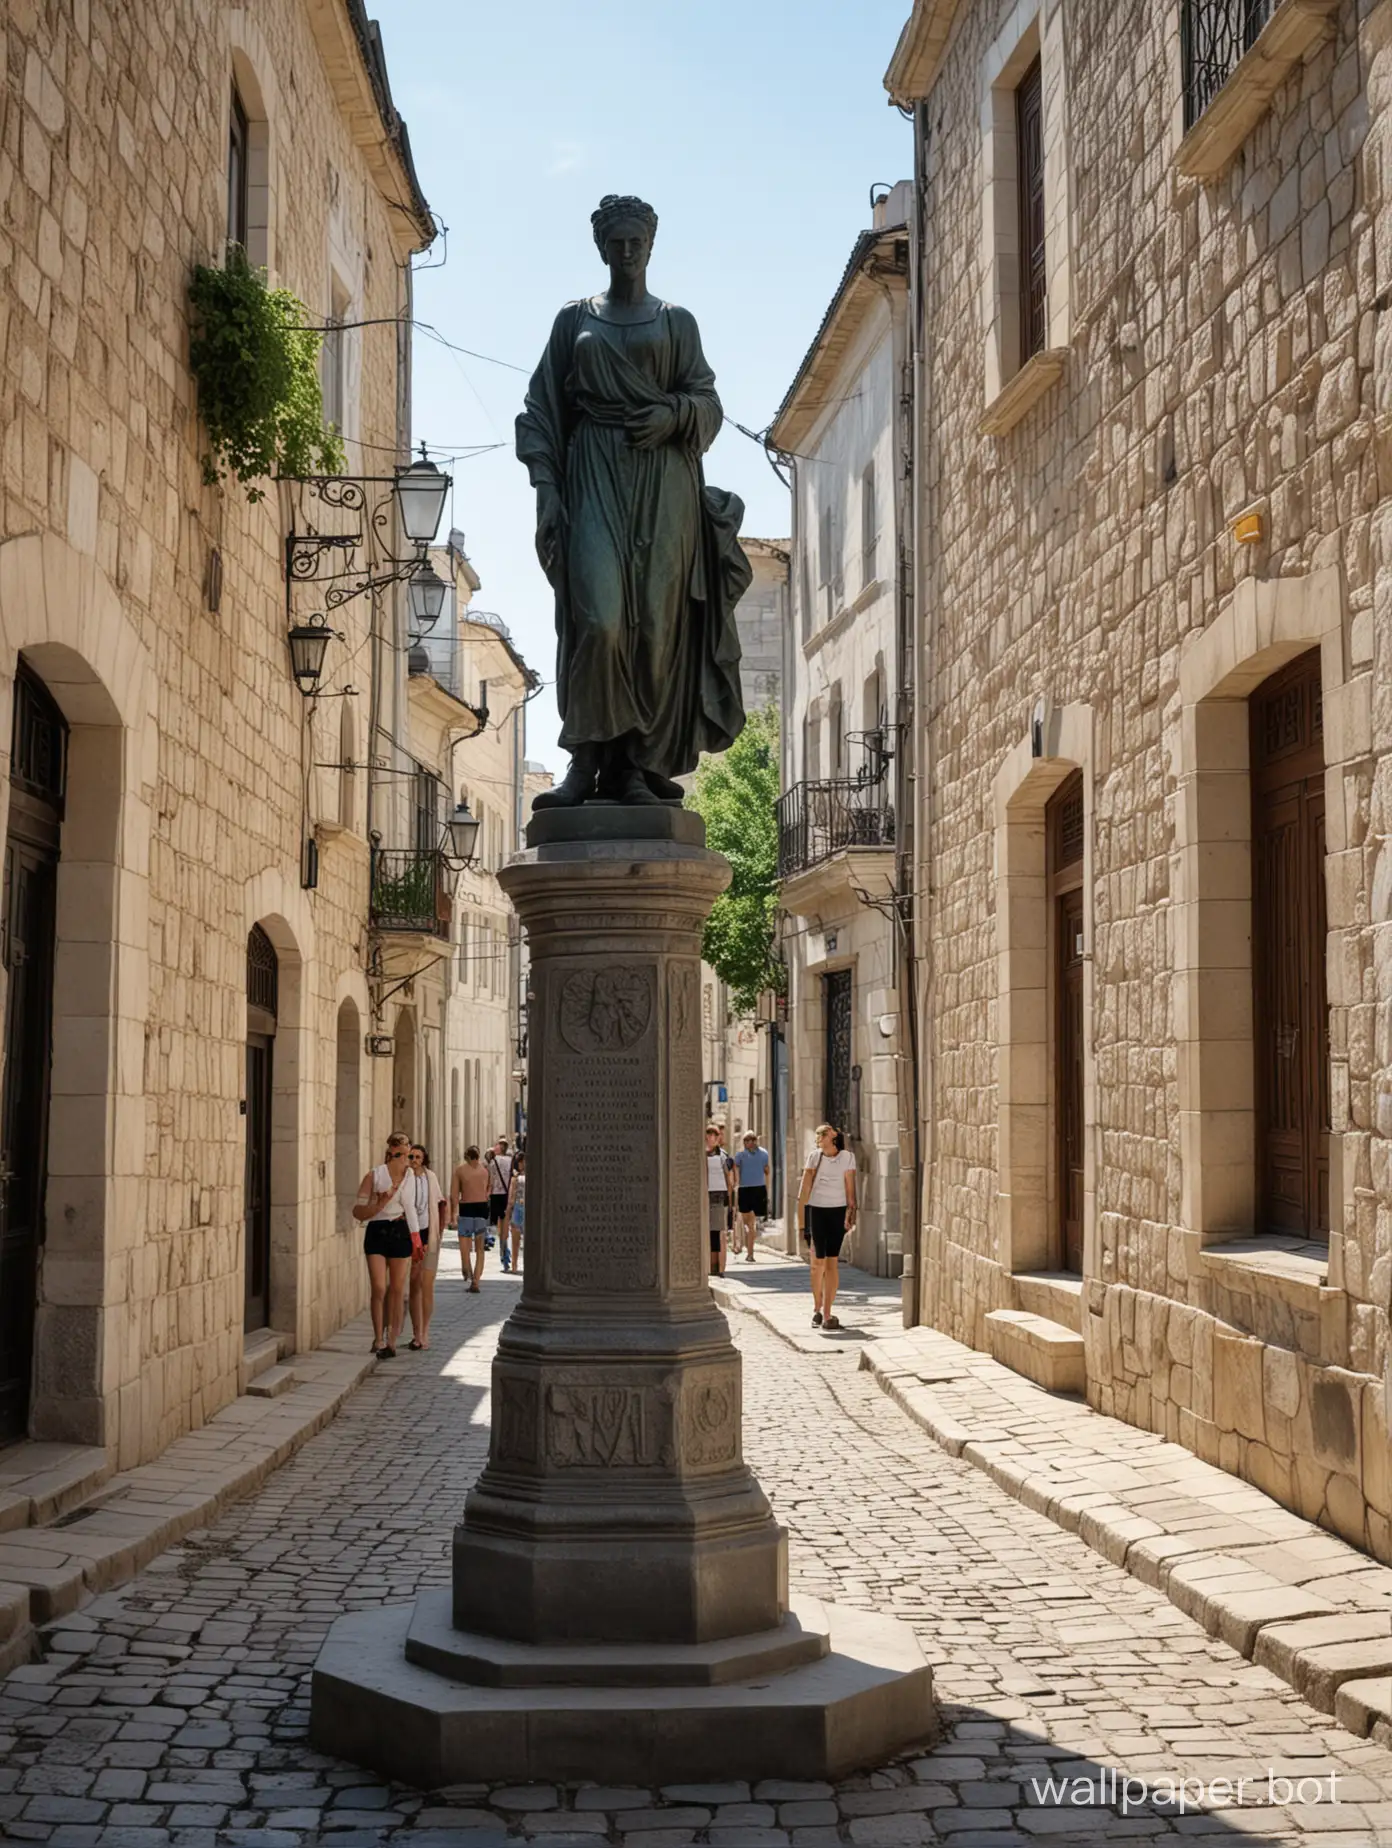 Crimea, old town, street, monument, people in summer clothes